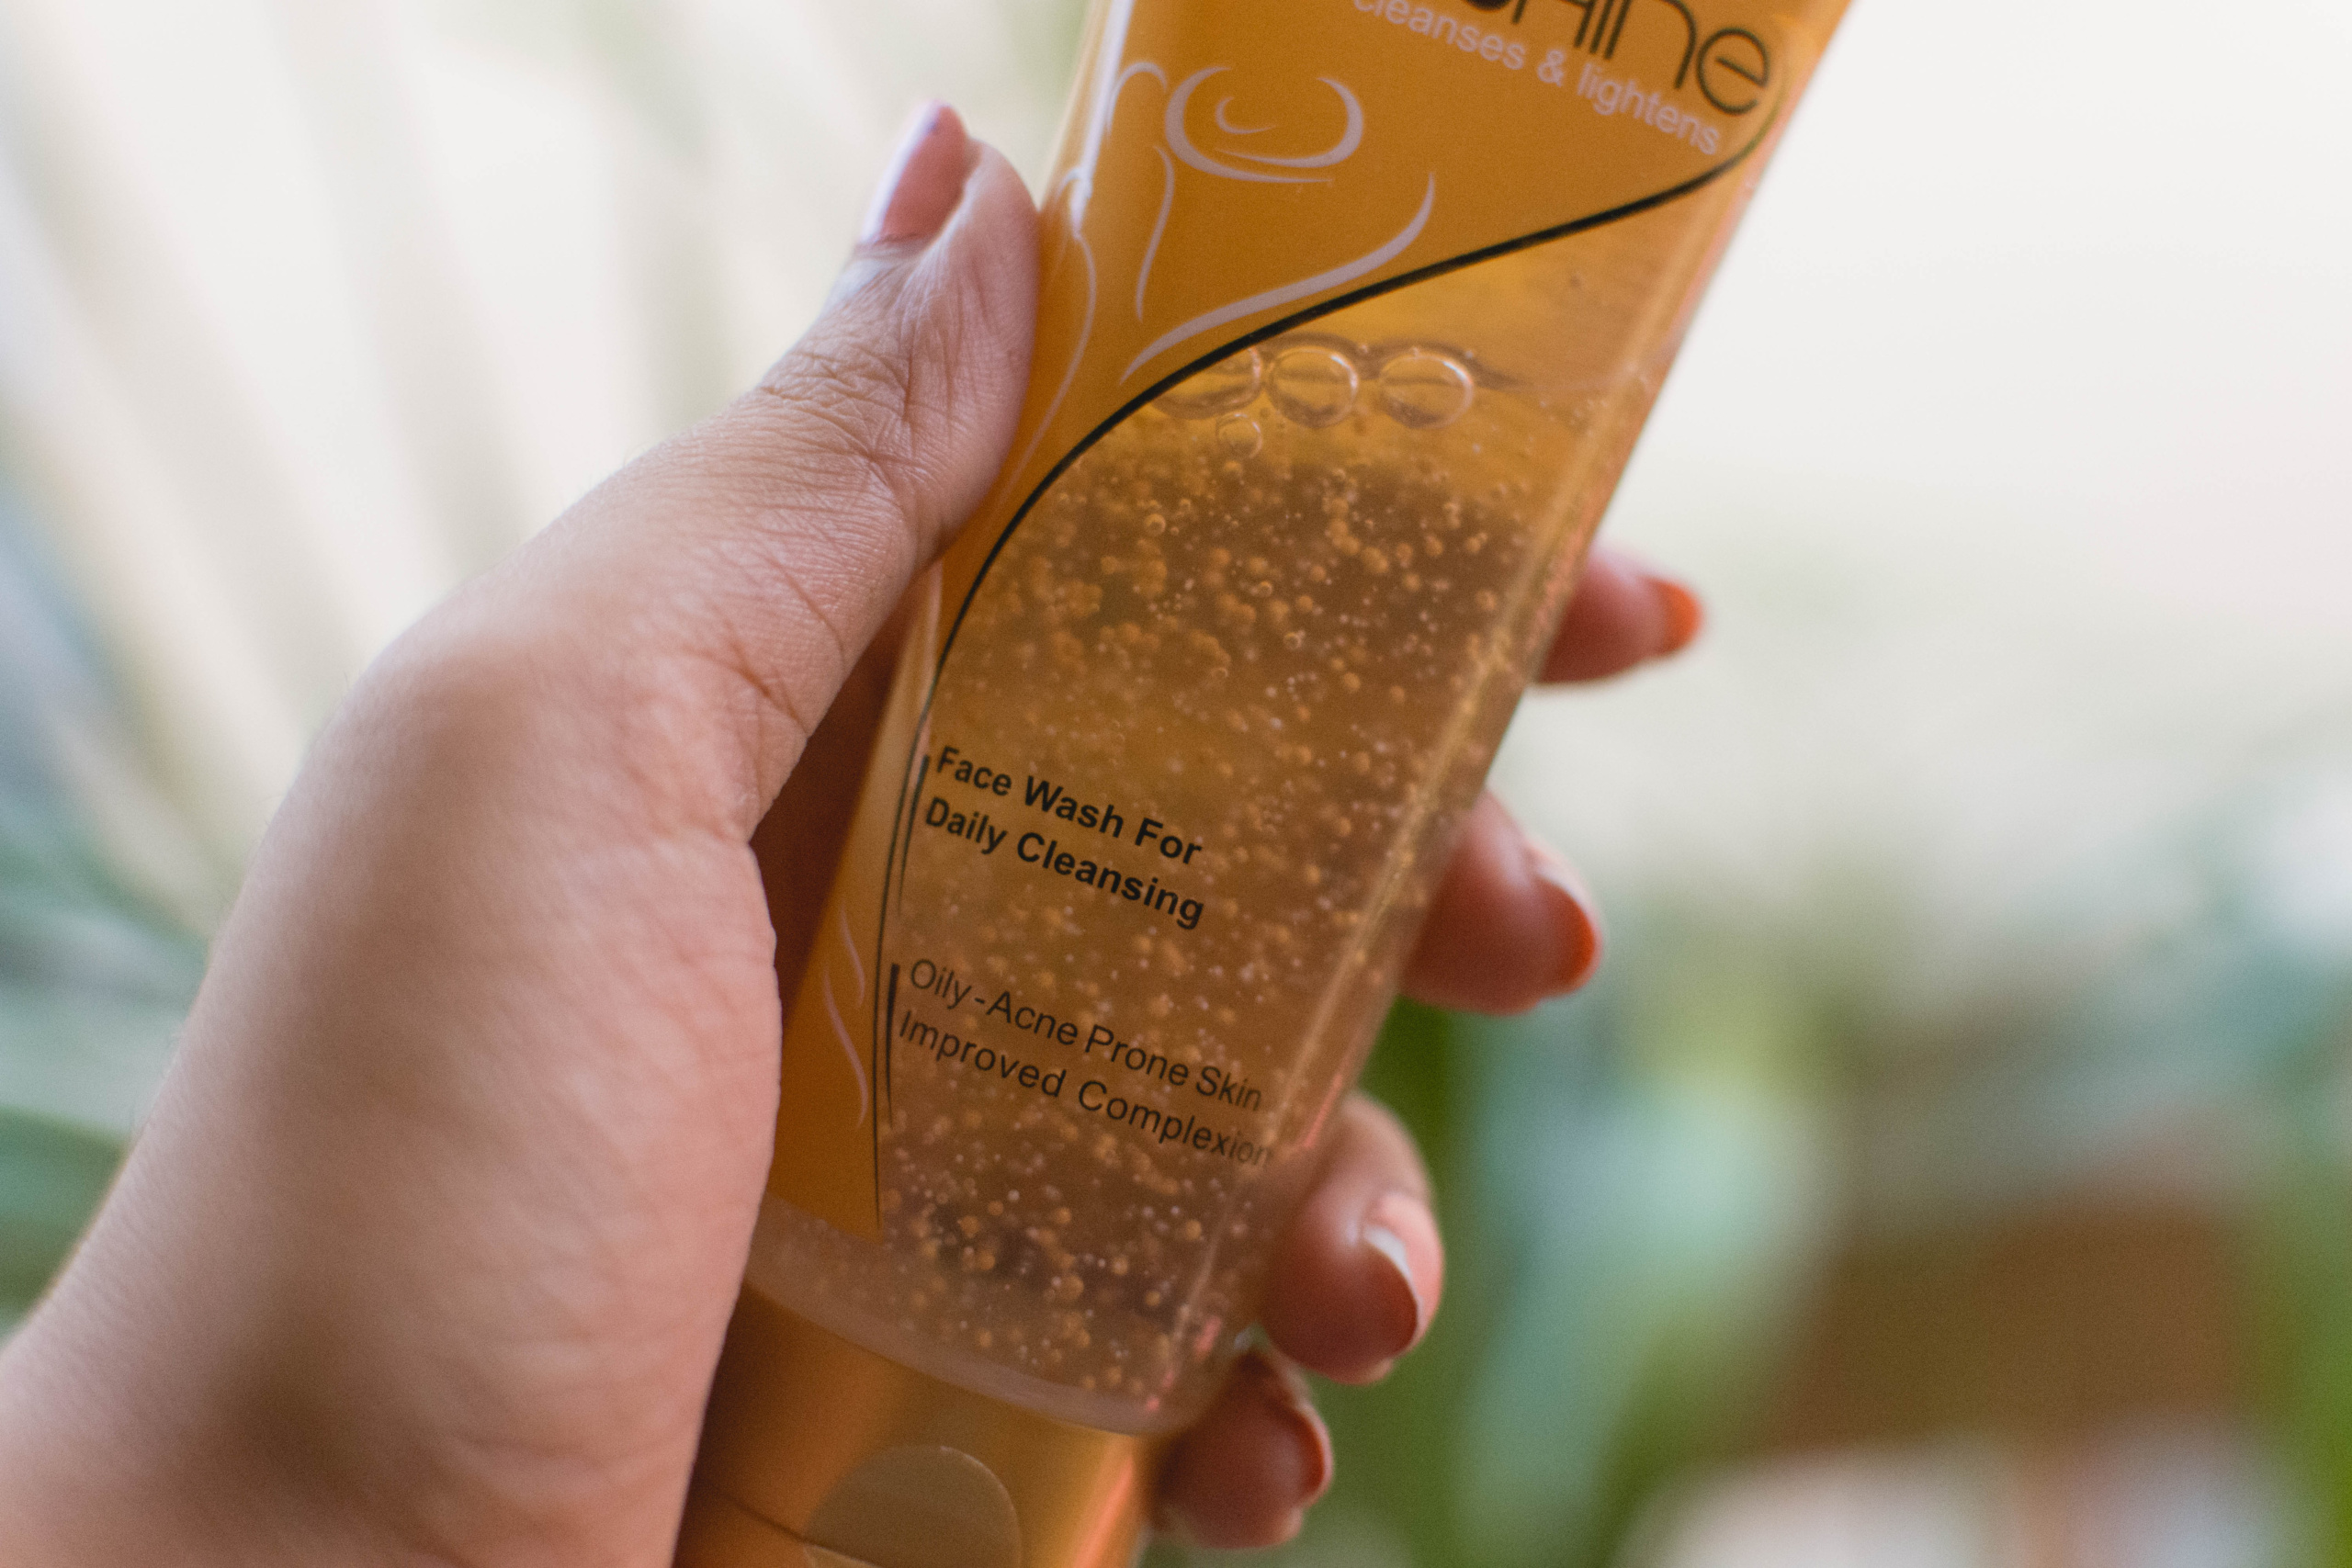 Cutishine Anti-acne Face Wash by Ethicare Remedies Review | Cherry On Top